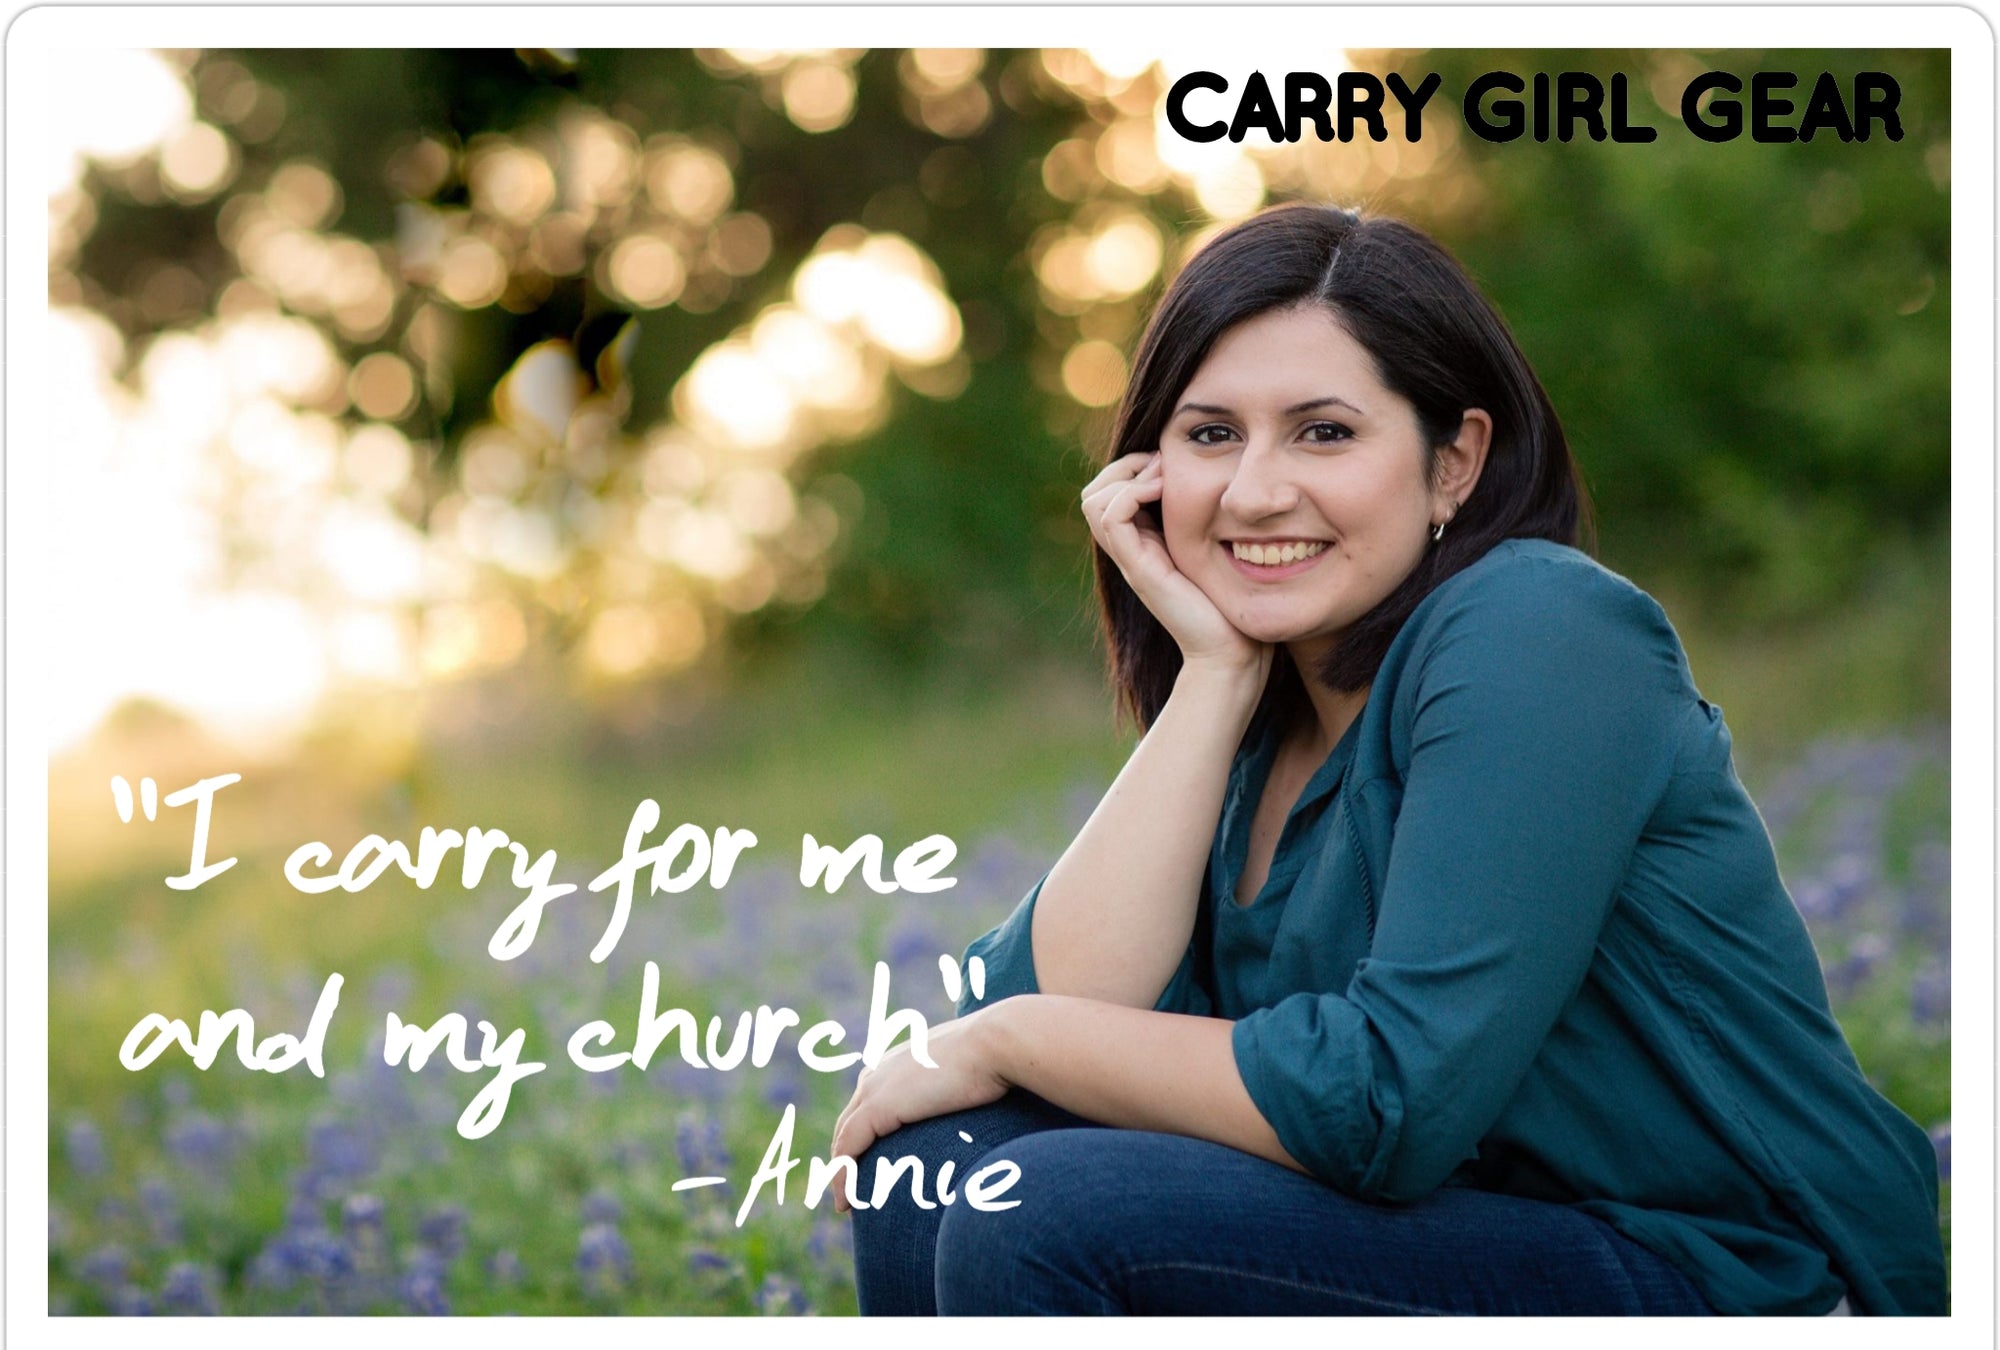 "I carry for me and my church. " -Annie, Texas